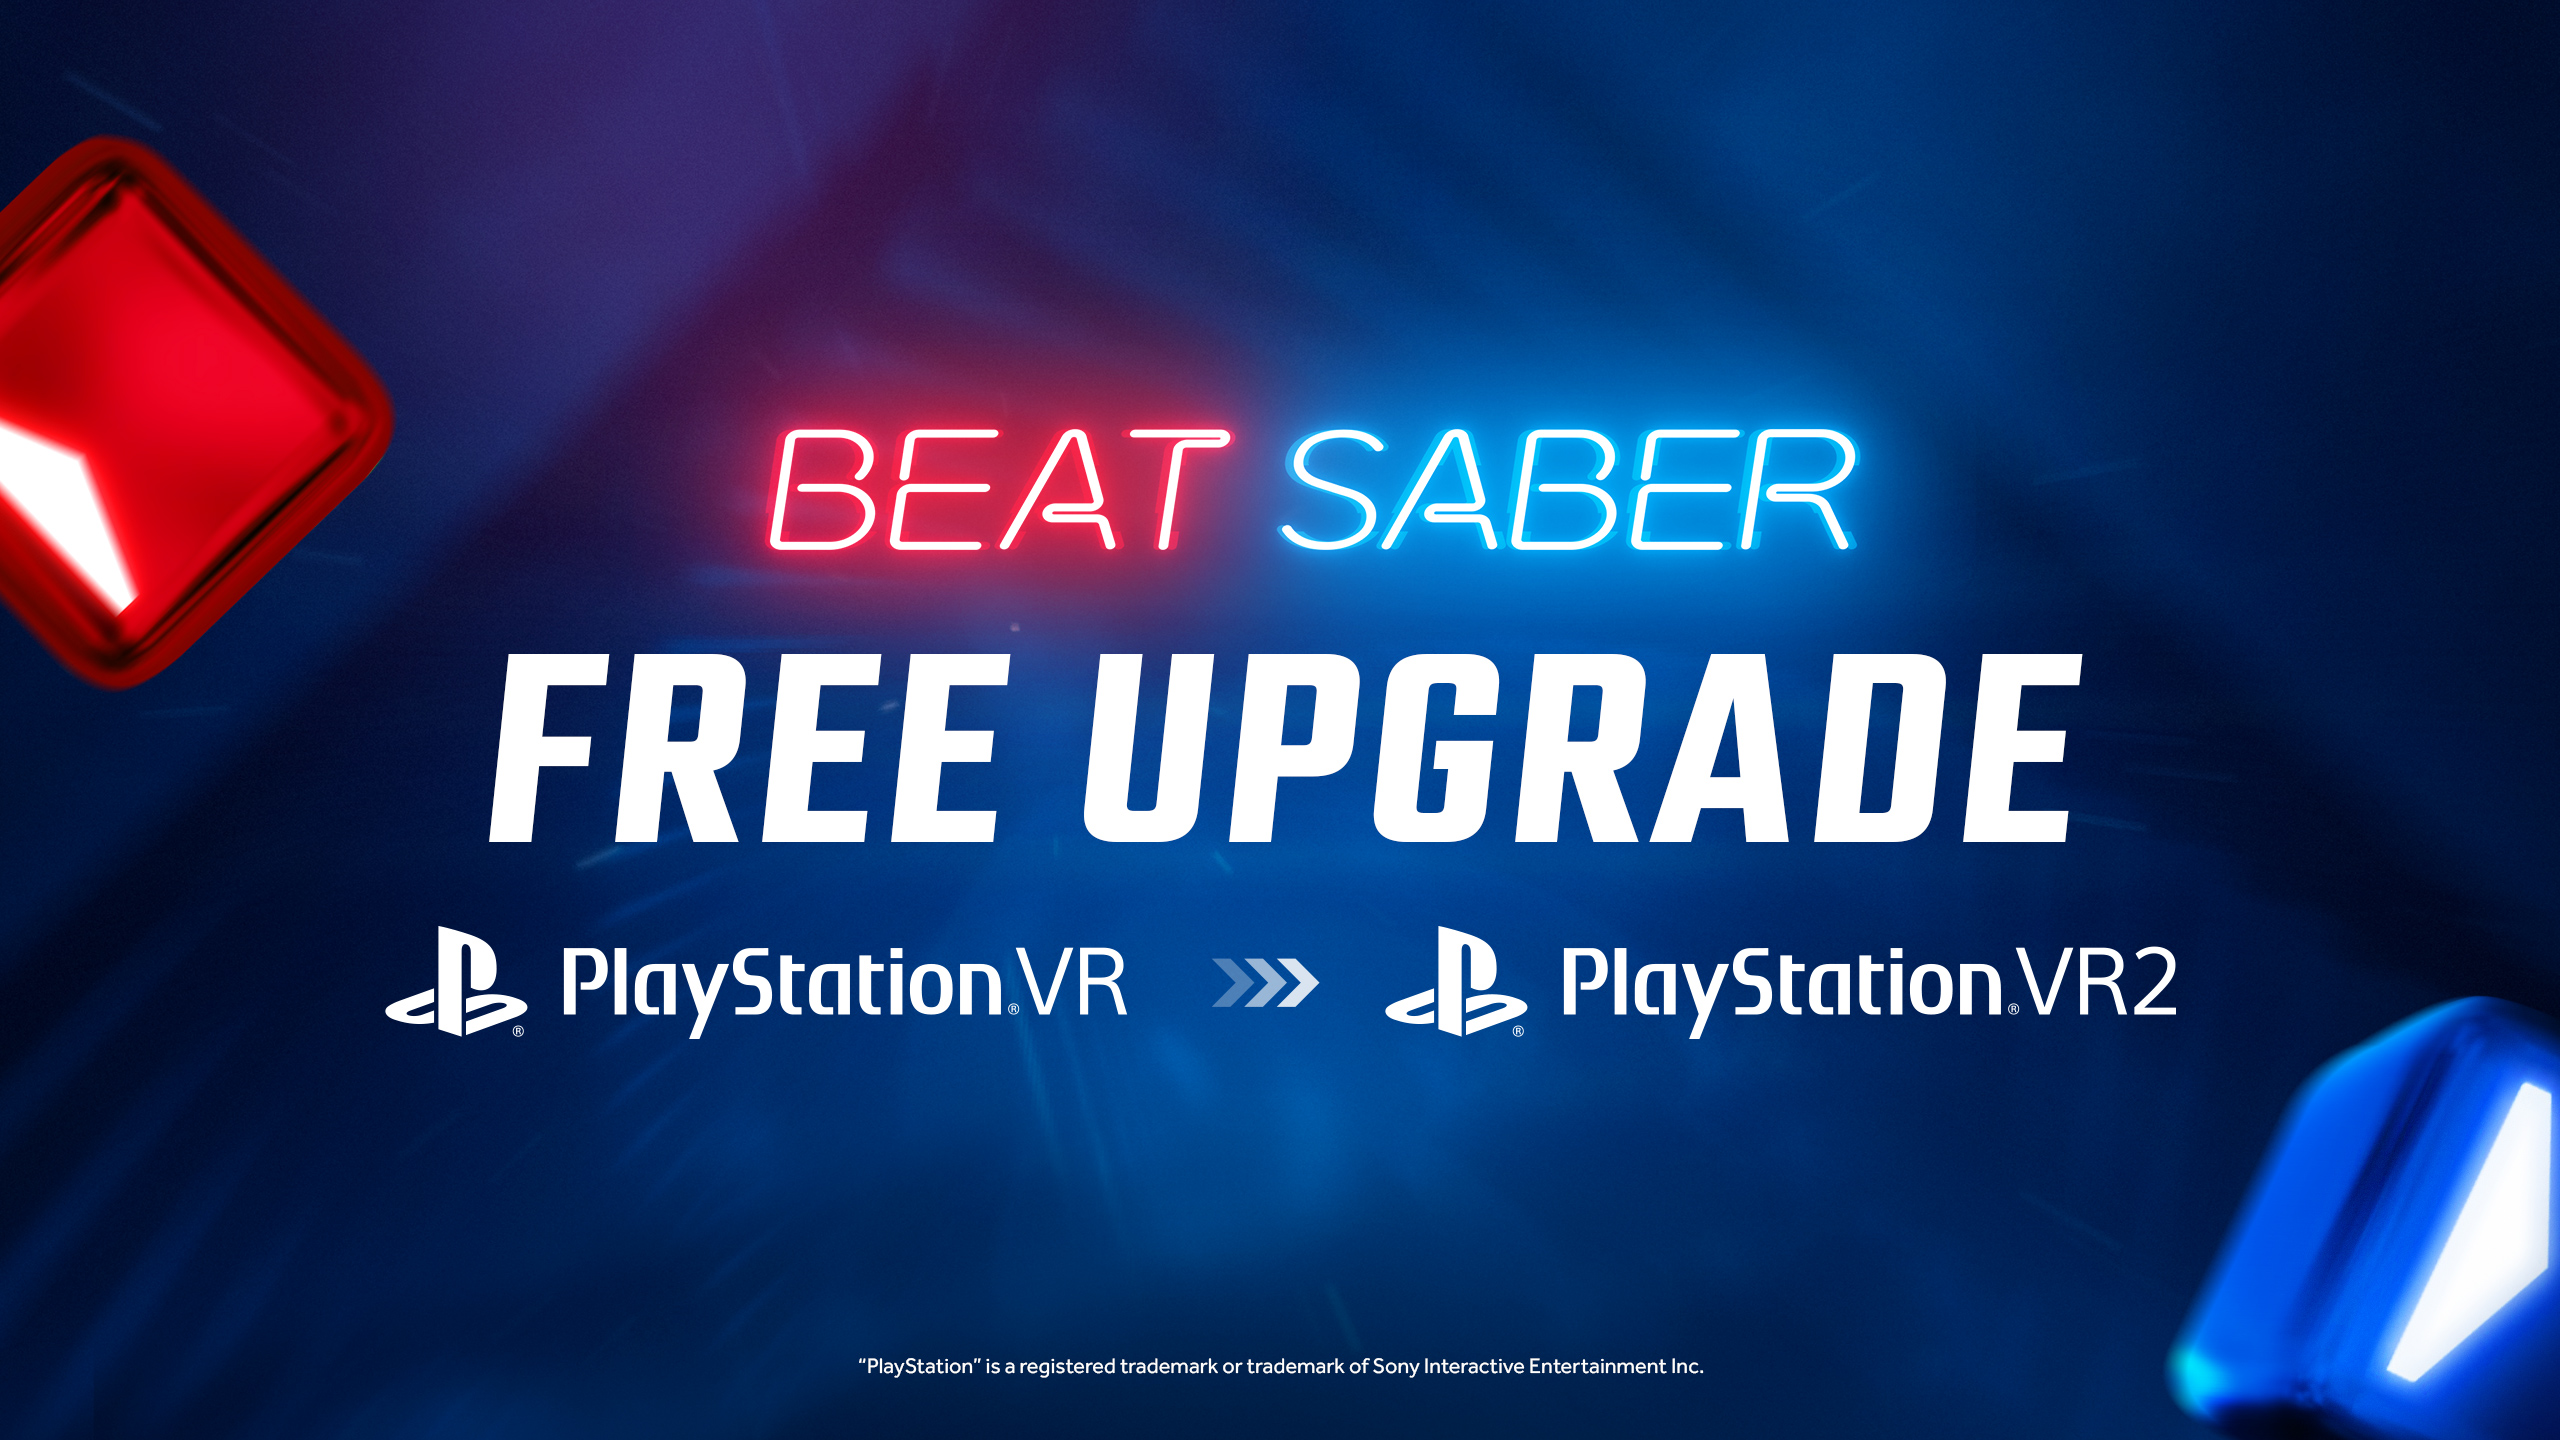 Duke politi tjenestemænd Beat Saber on Twitter: "Beat Saber is now available on PlayStation VR2!  Here's few things you shouldn't miss. ✓If you already own Beat Saber on PS  VR, you can upgrade to PS